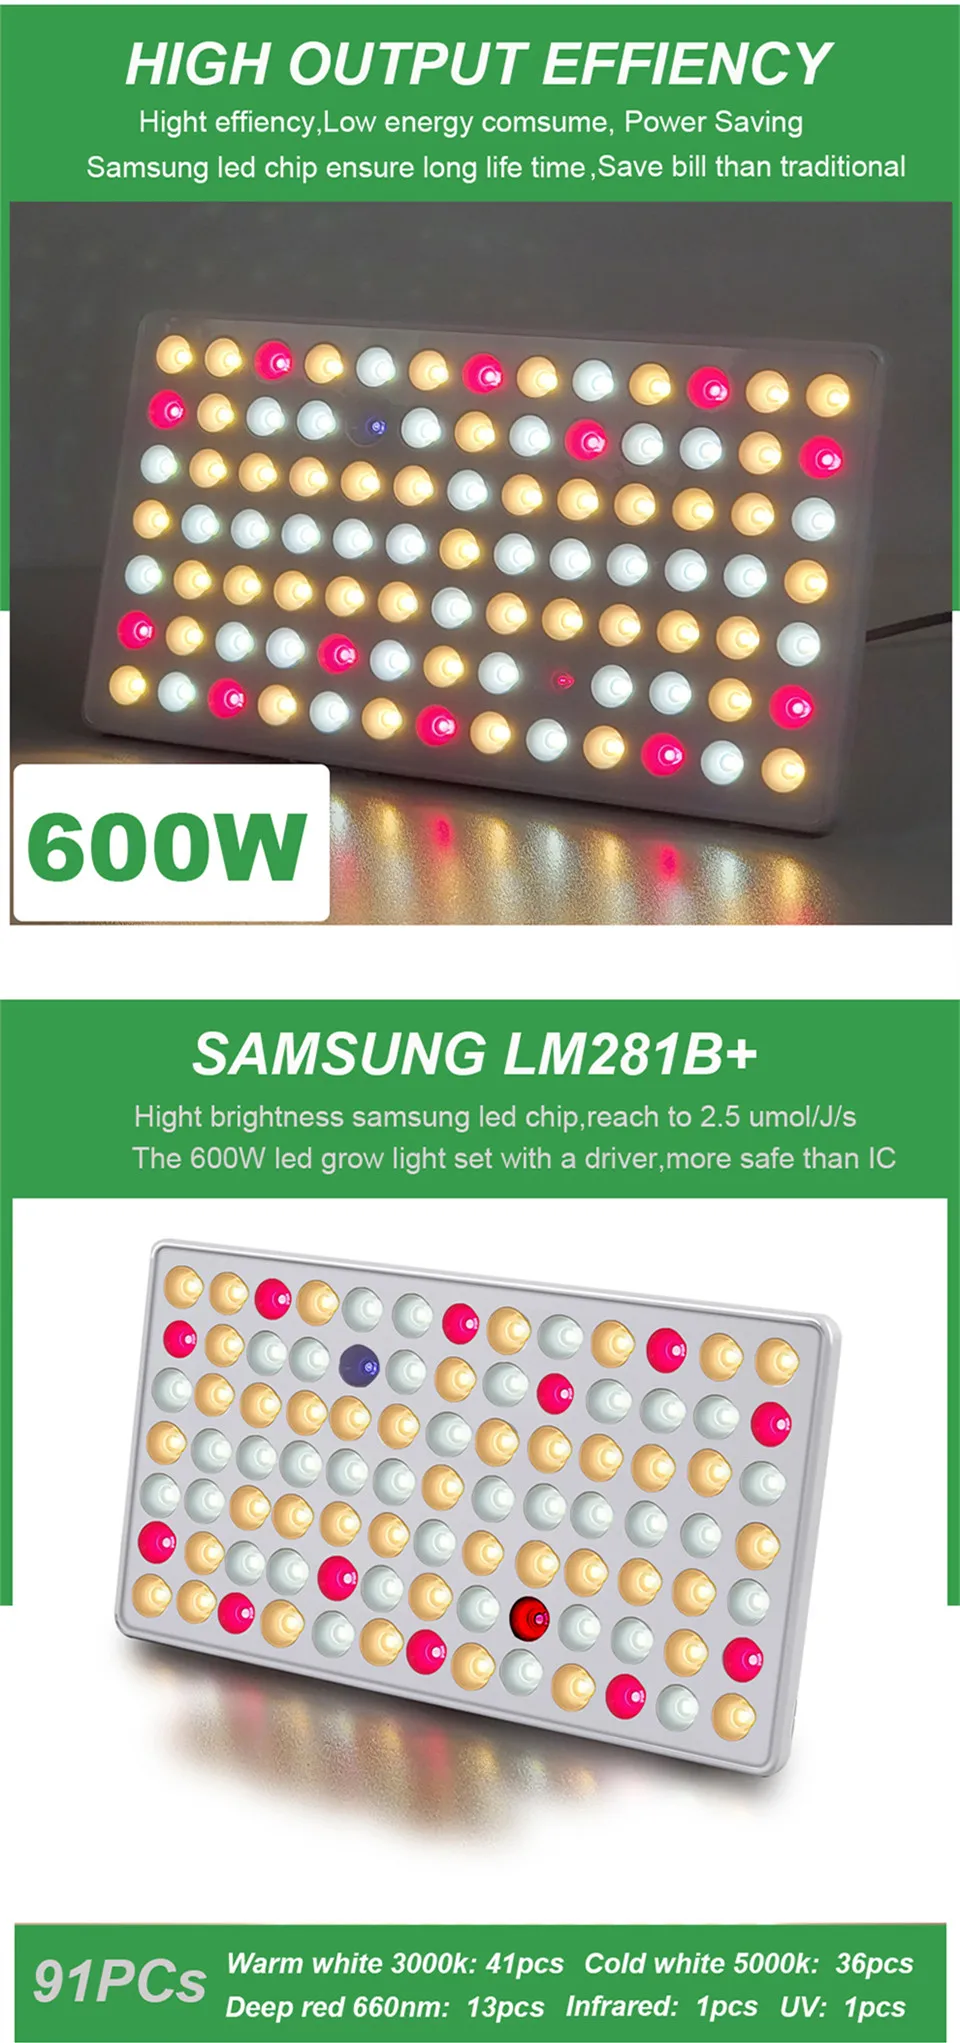 Newest LED grow light 60W Samsung lm281b 2.5 umol/J replace 600W indoor full spectrum LED grow light for plants 